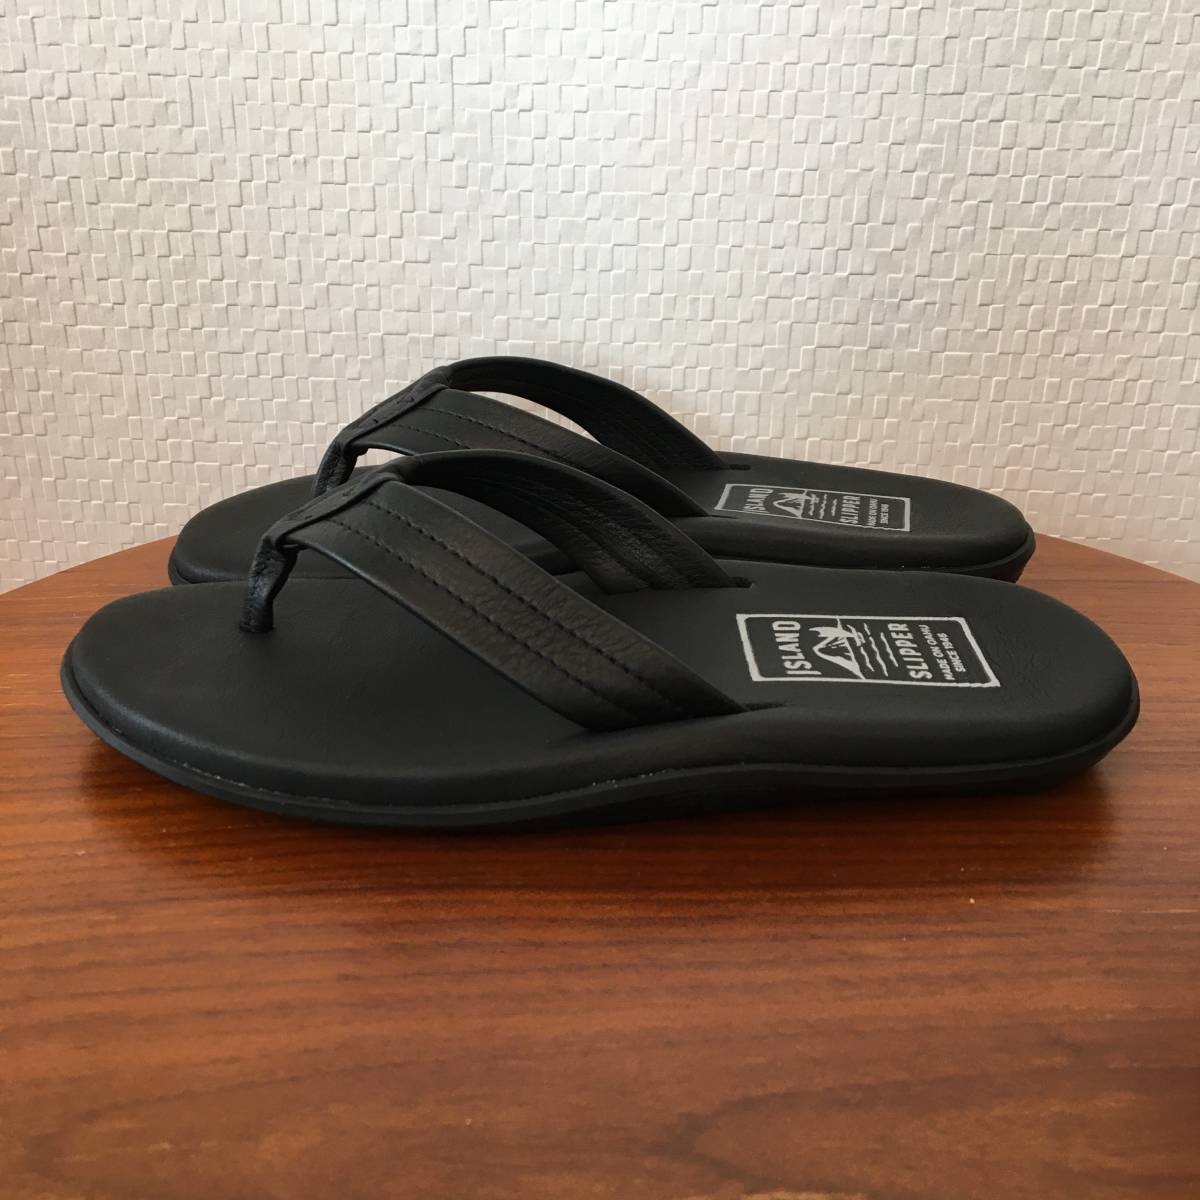 26.0cm(US 8)l ISLAND SLIPPER Islay ndo slippers PB202 sandals black black smooth leather Hawaii or f( new goods )( prompt decision )( regular goods )